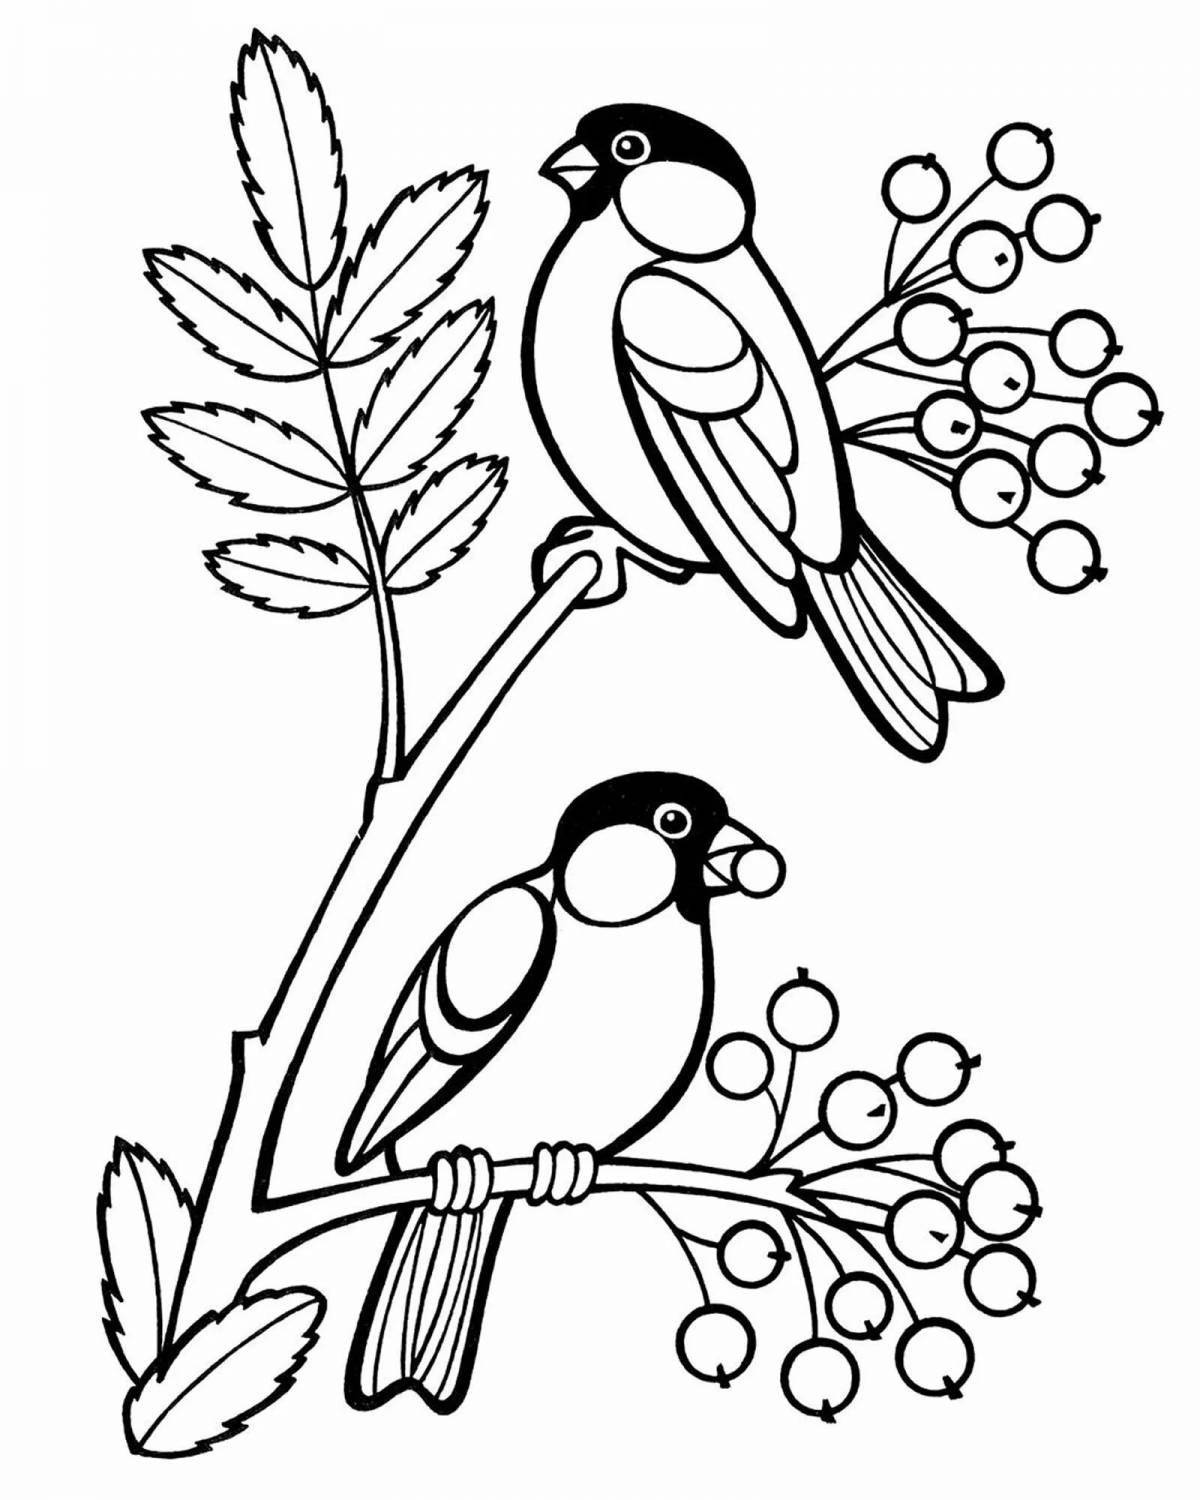 Playful wintering birds coloring book for children 2-3 years old